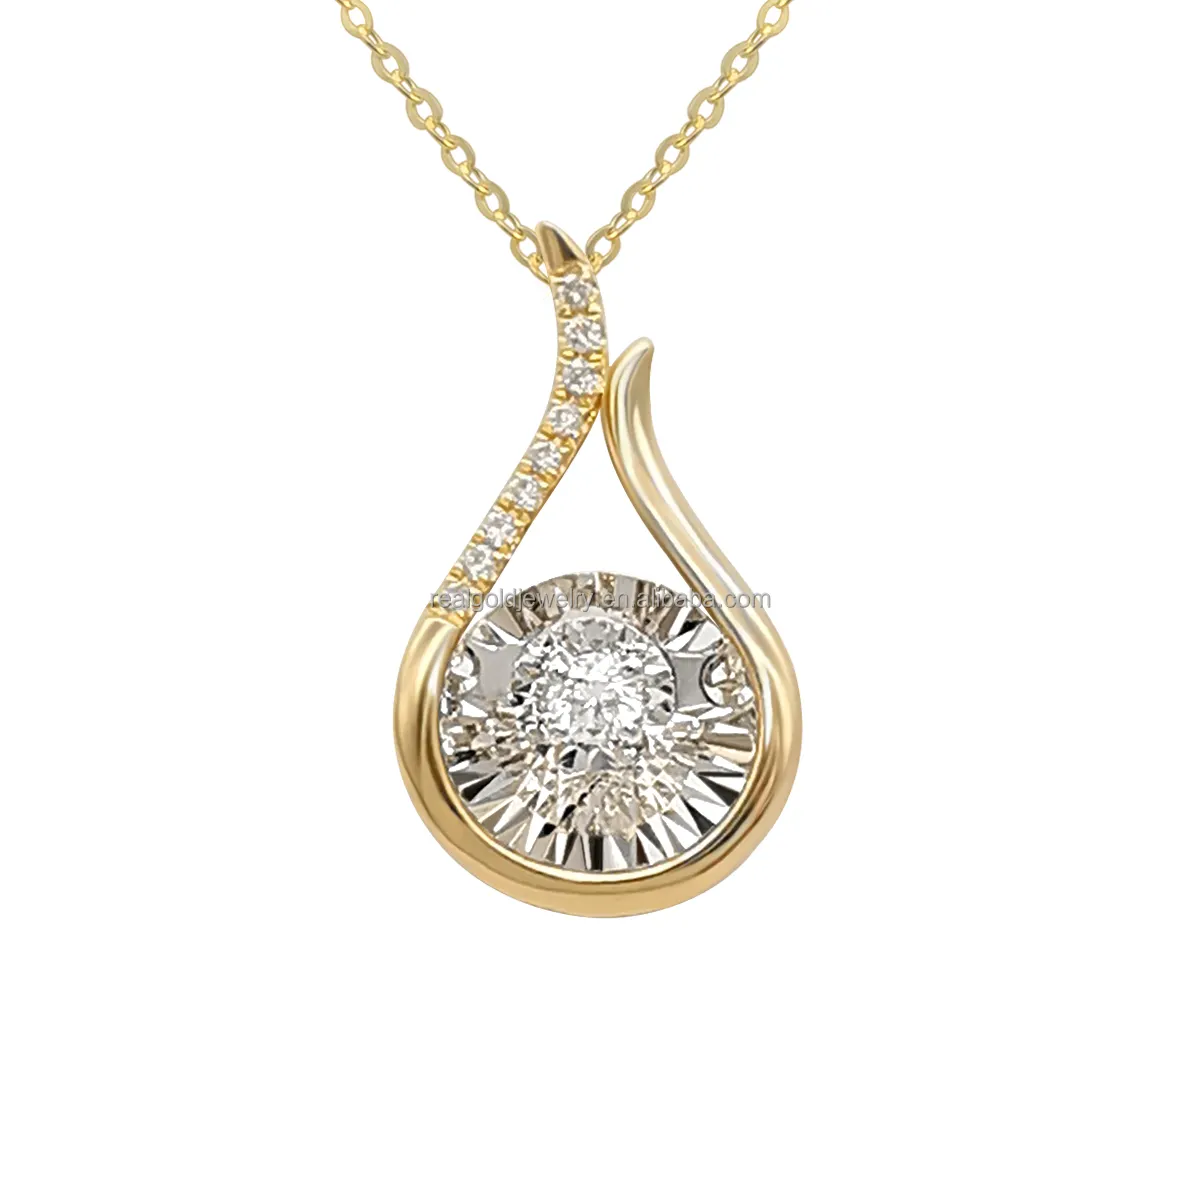 Luxury Jewelry Solid 18K Gold Necklace Dancing Diamond 18K Real Gold Pendant Necklace Fine Jewelry Wholesale